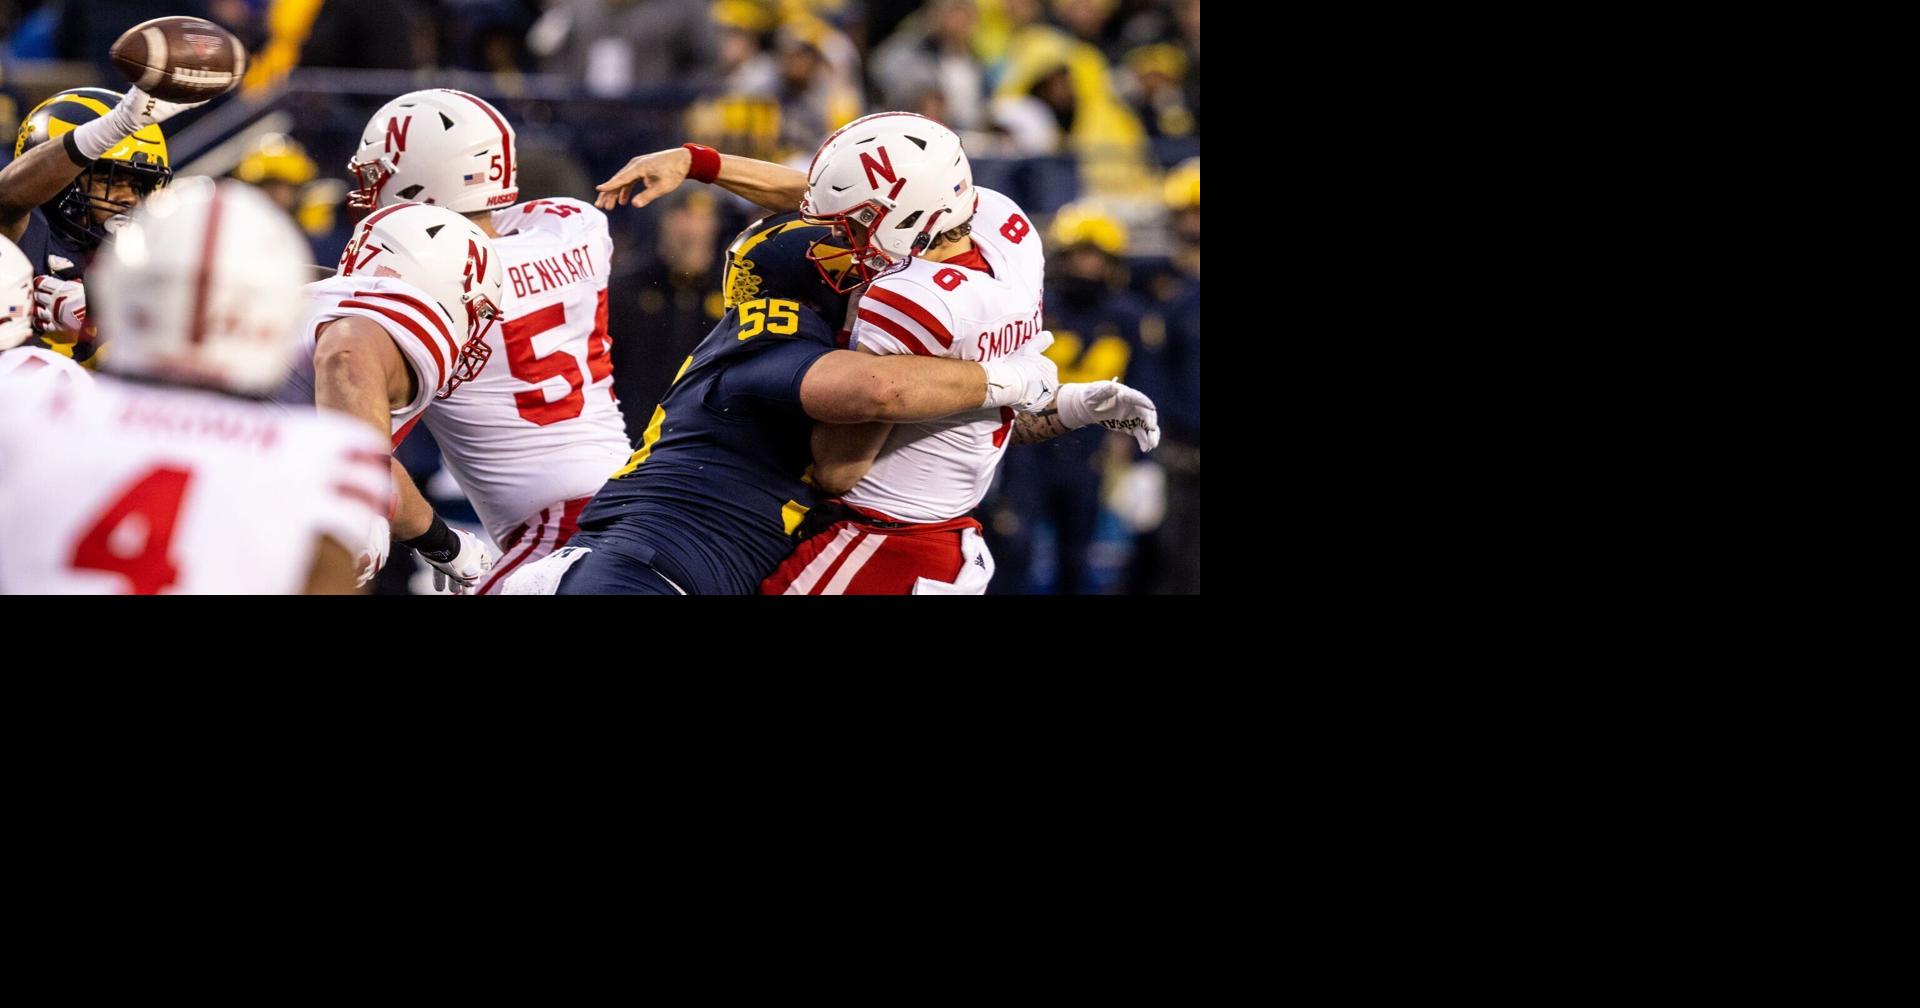 Amie Just: Few silver linings to be found in Nebraska’s 34-3 loss to No. 3 Michigan